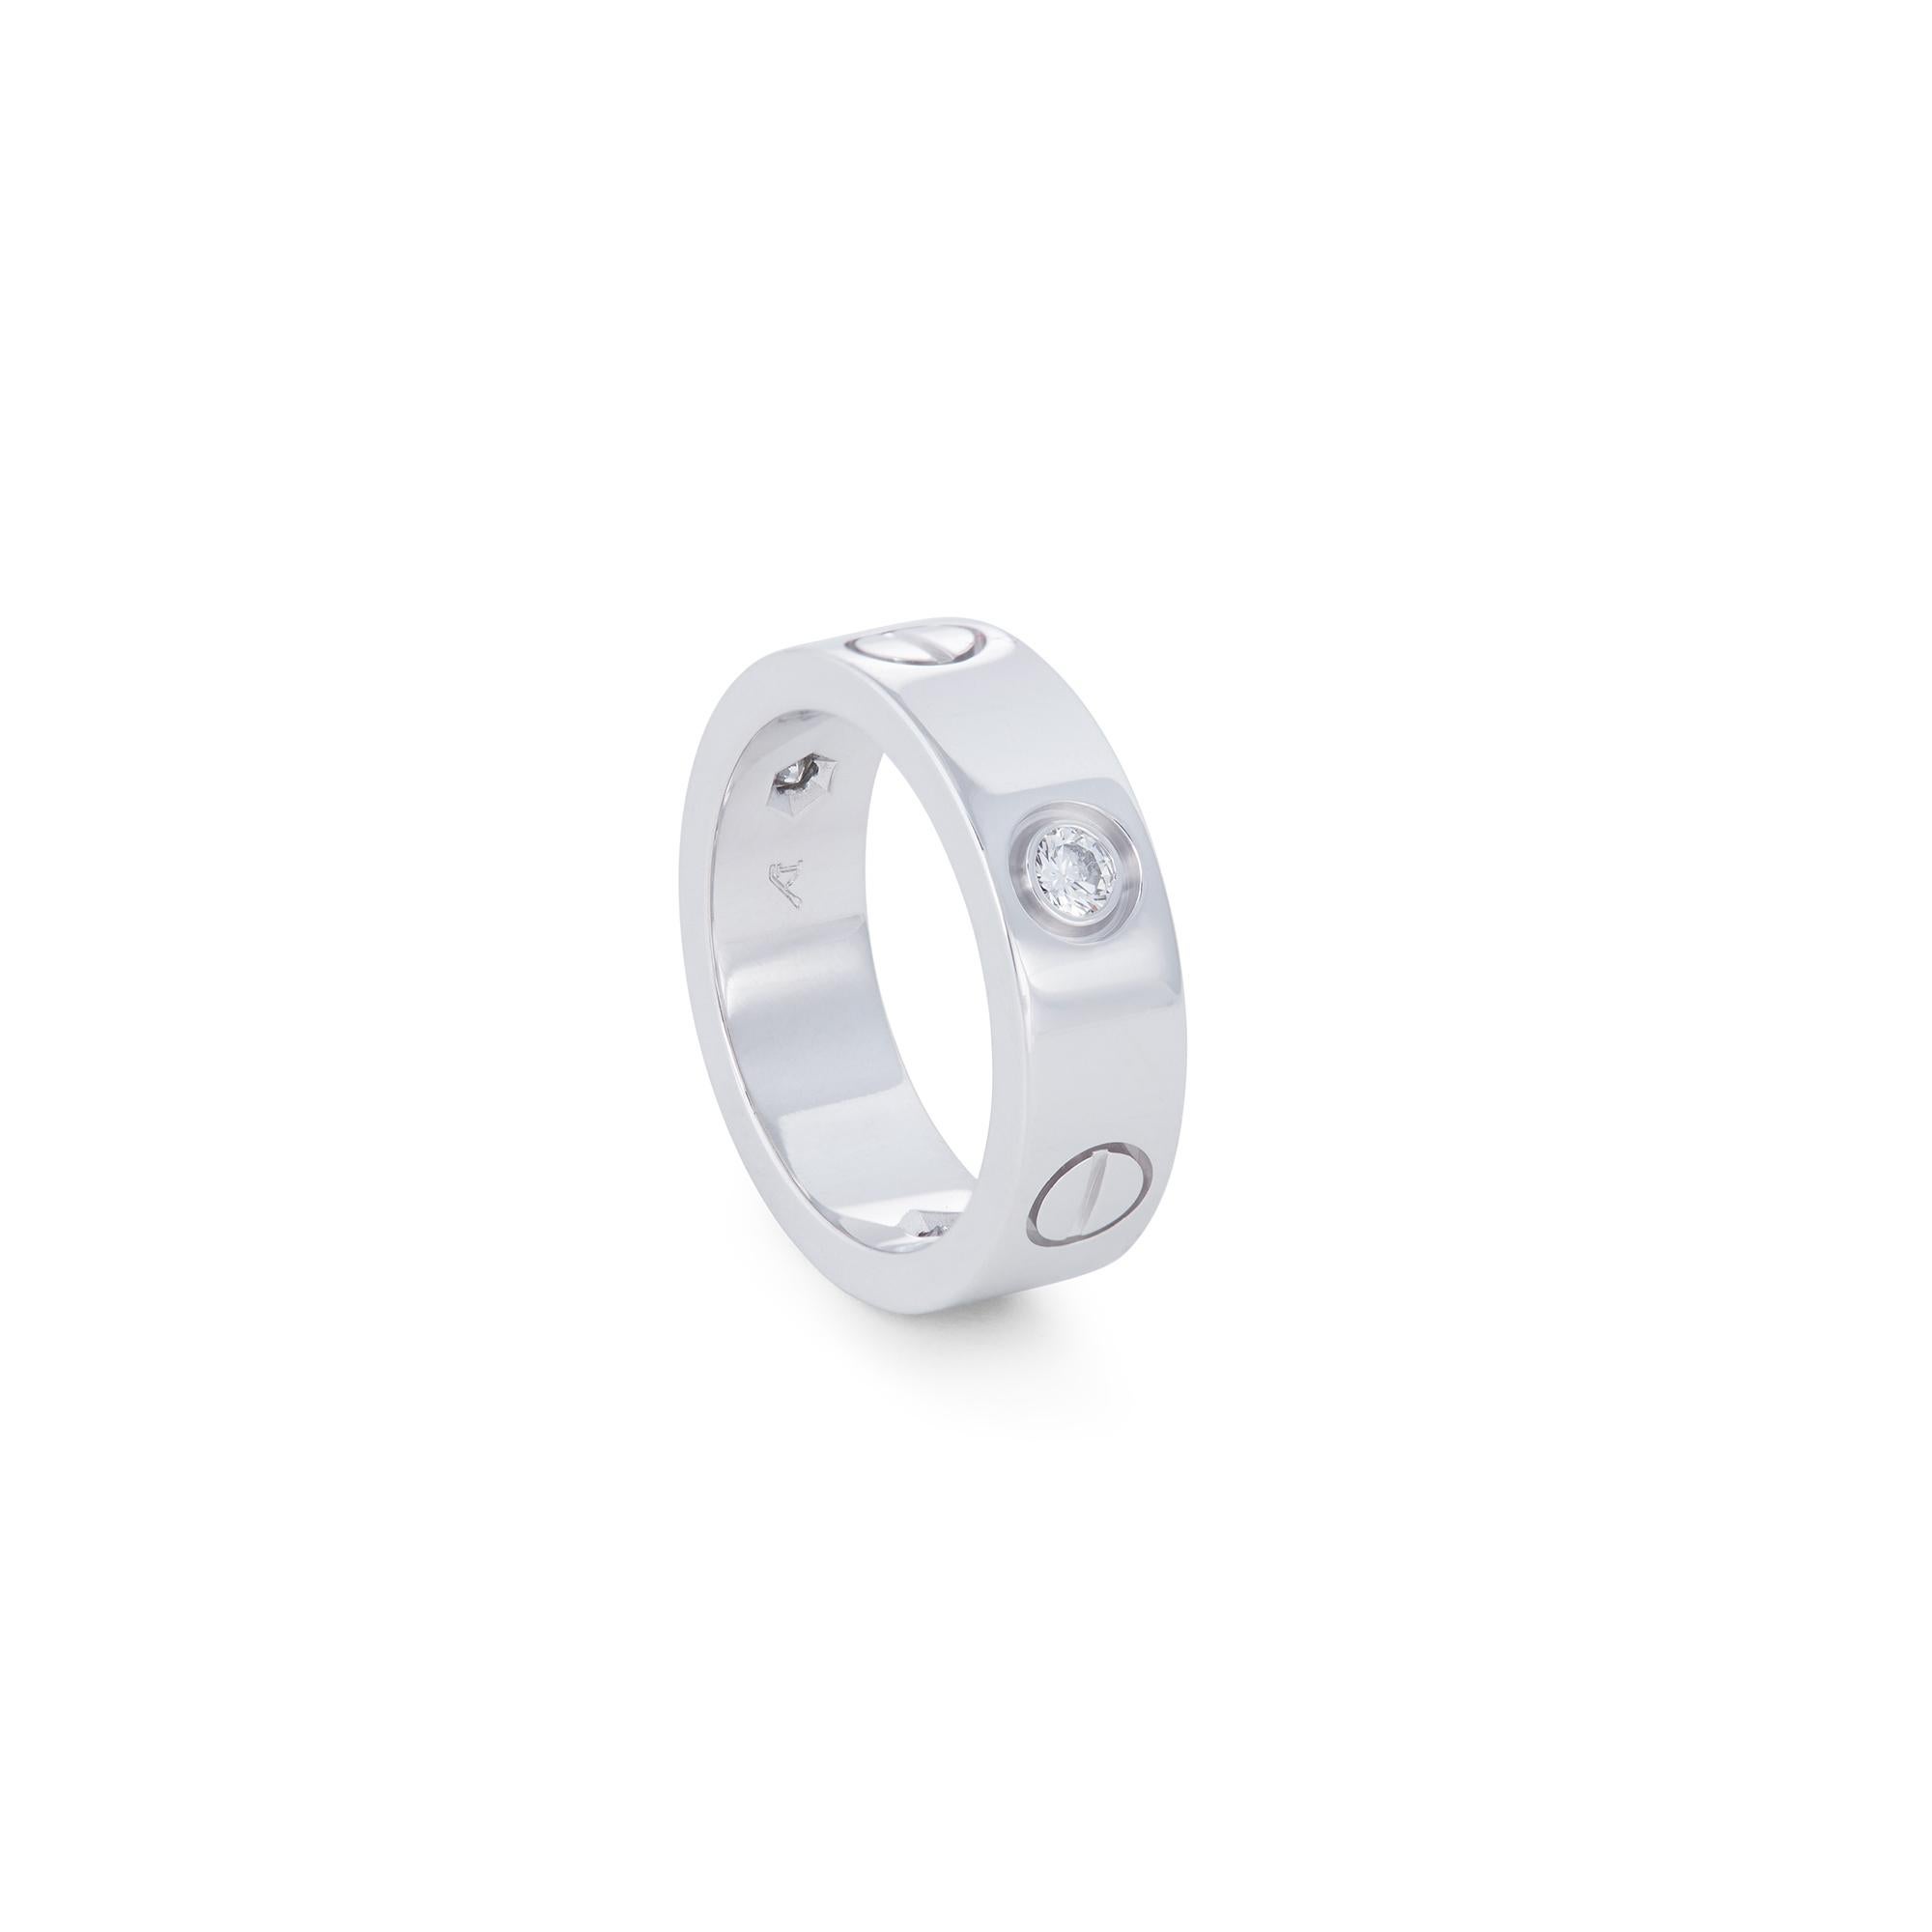 Authentic Cartier 'Love' ring crafted in 18 karat white gold and set with three high-quality round brilliant cut diamonds weighing an estimated 0.22 carats total weight. Ring size 49 (US 4 3/4). Signed Cartier, Au 750, 1998 with serial number and